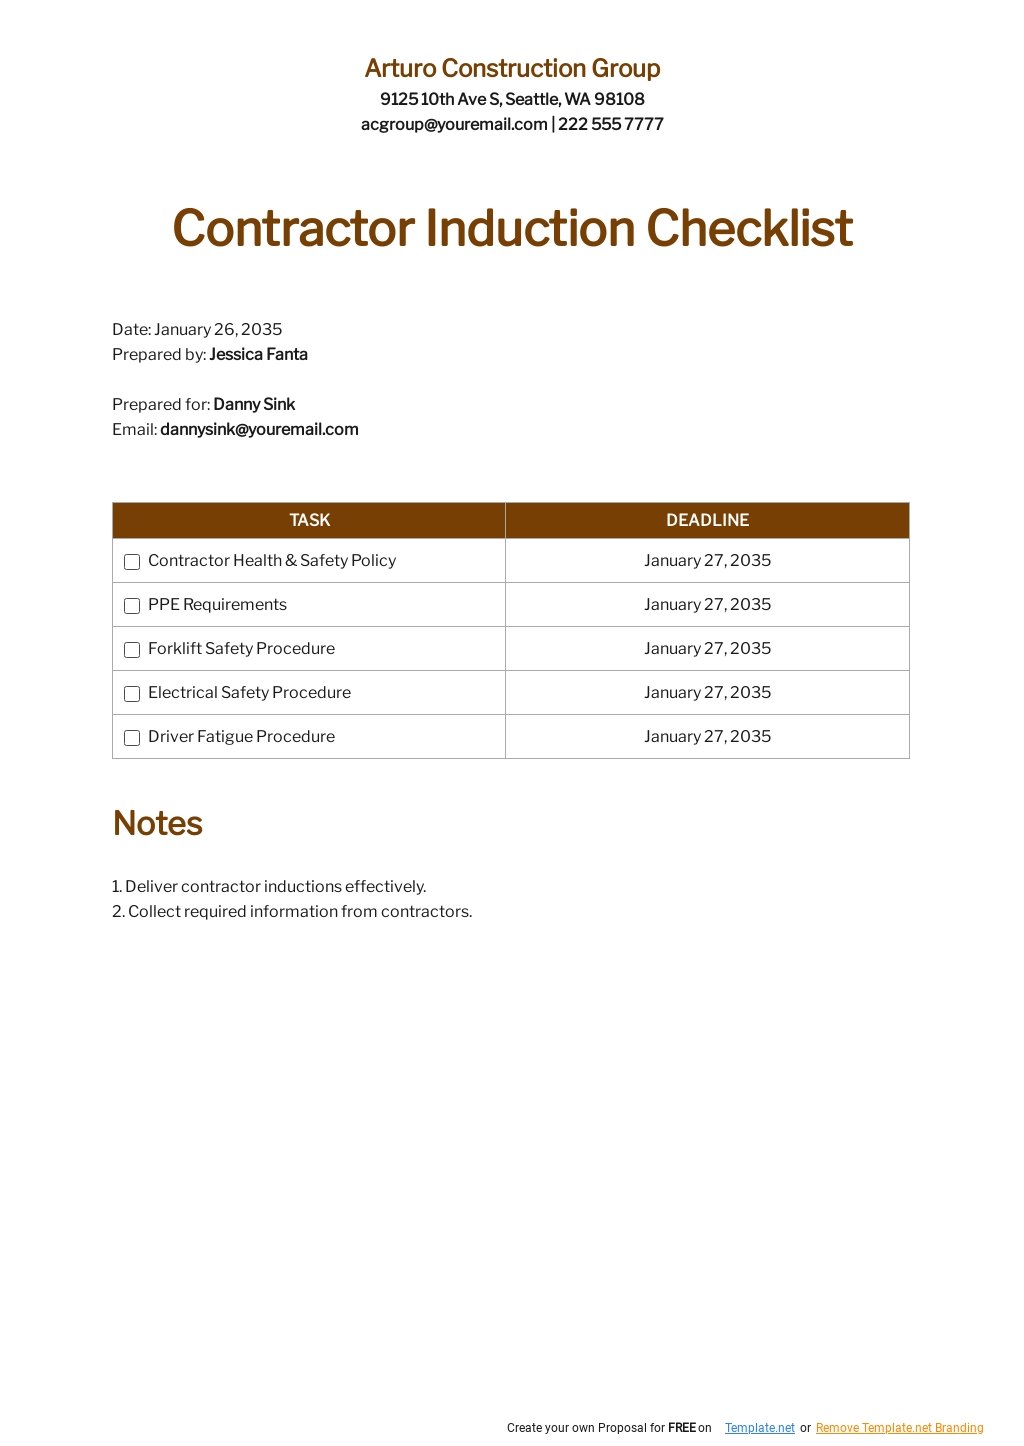 Contractor Induction Checklist Template